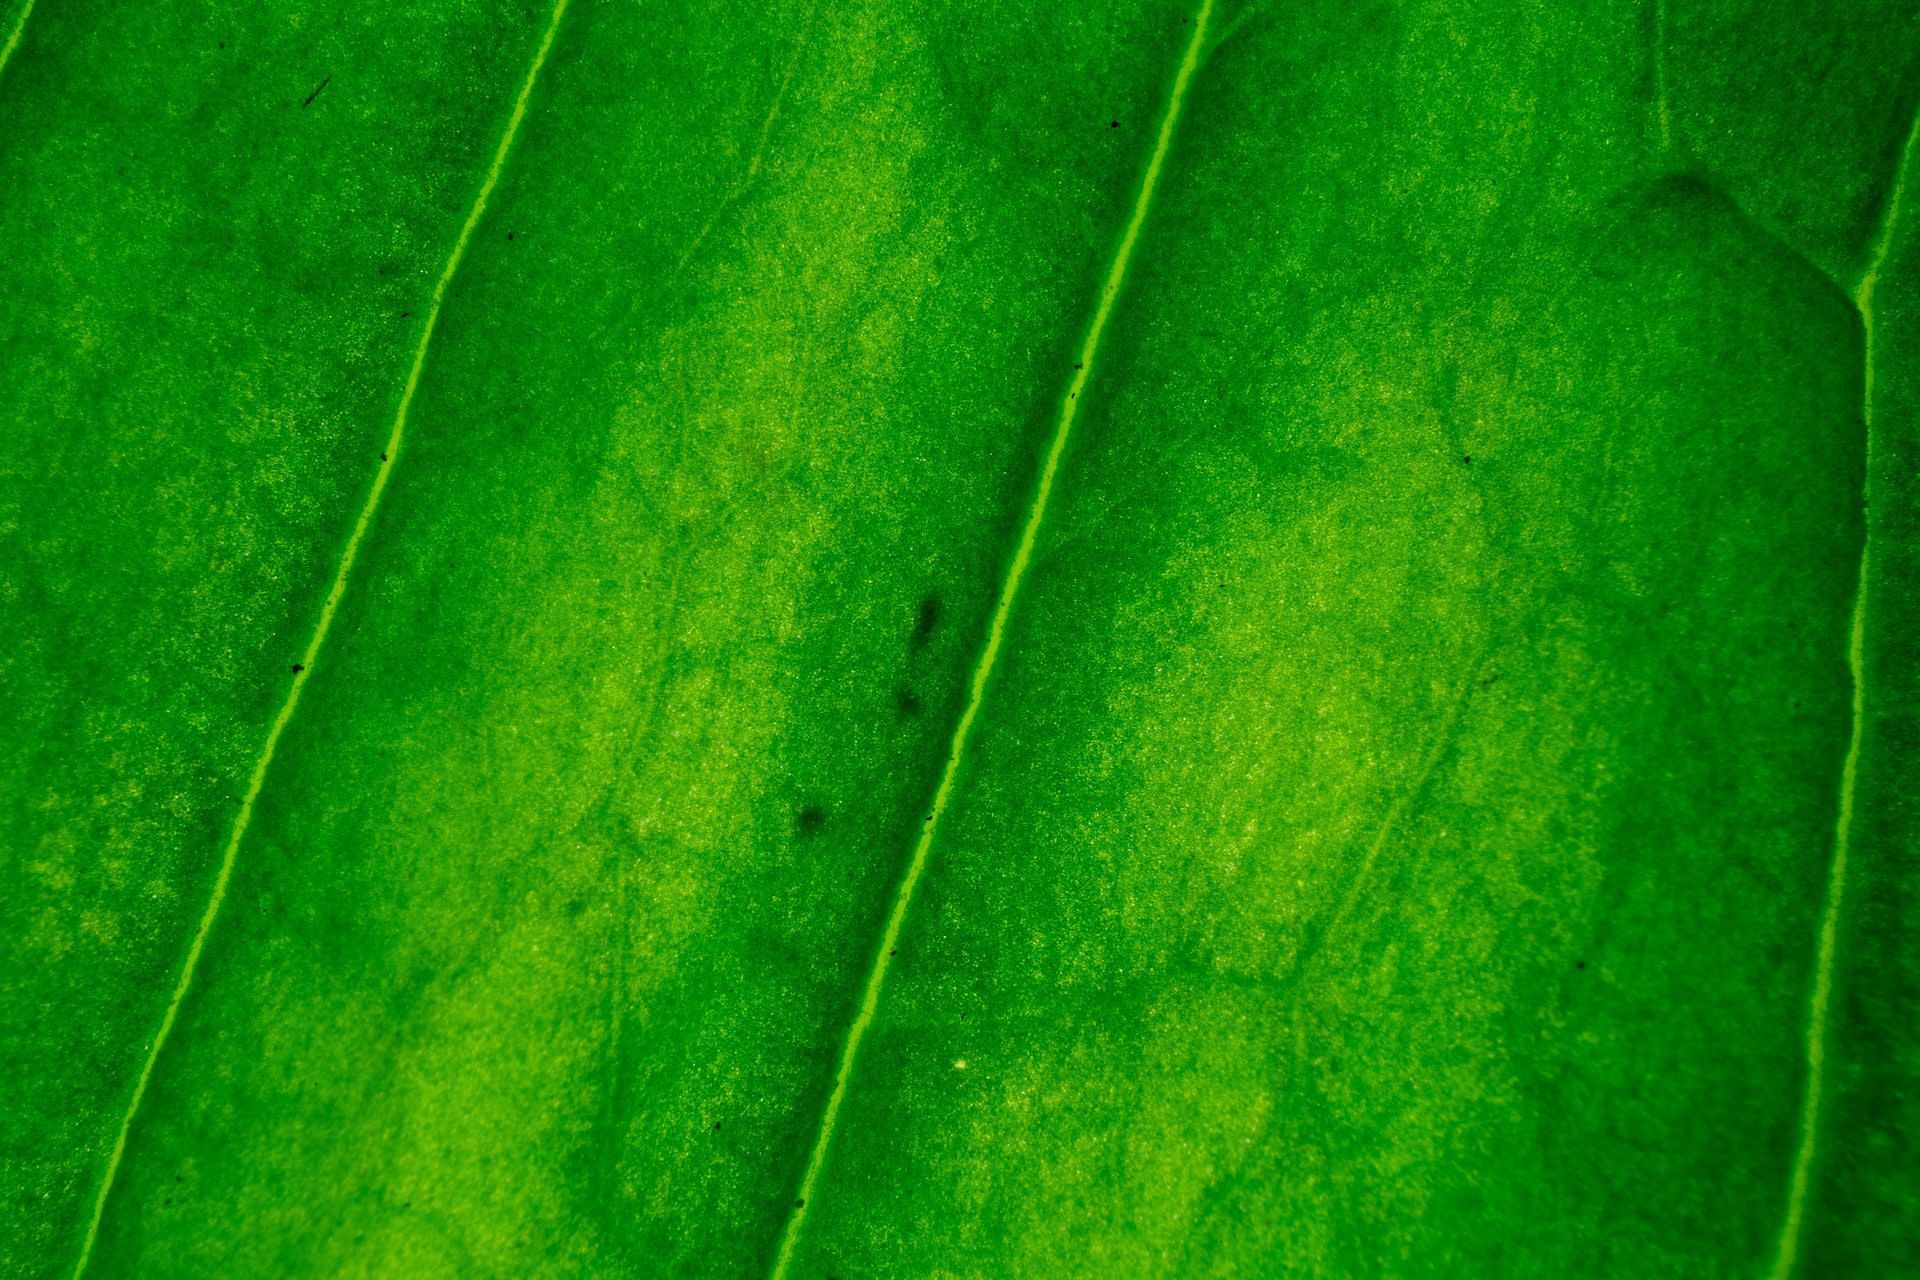 Chlorophyll is the compound which helps in photosynthesis. (Image via Pexels/Kelly)